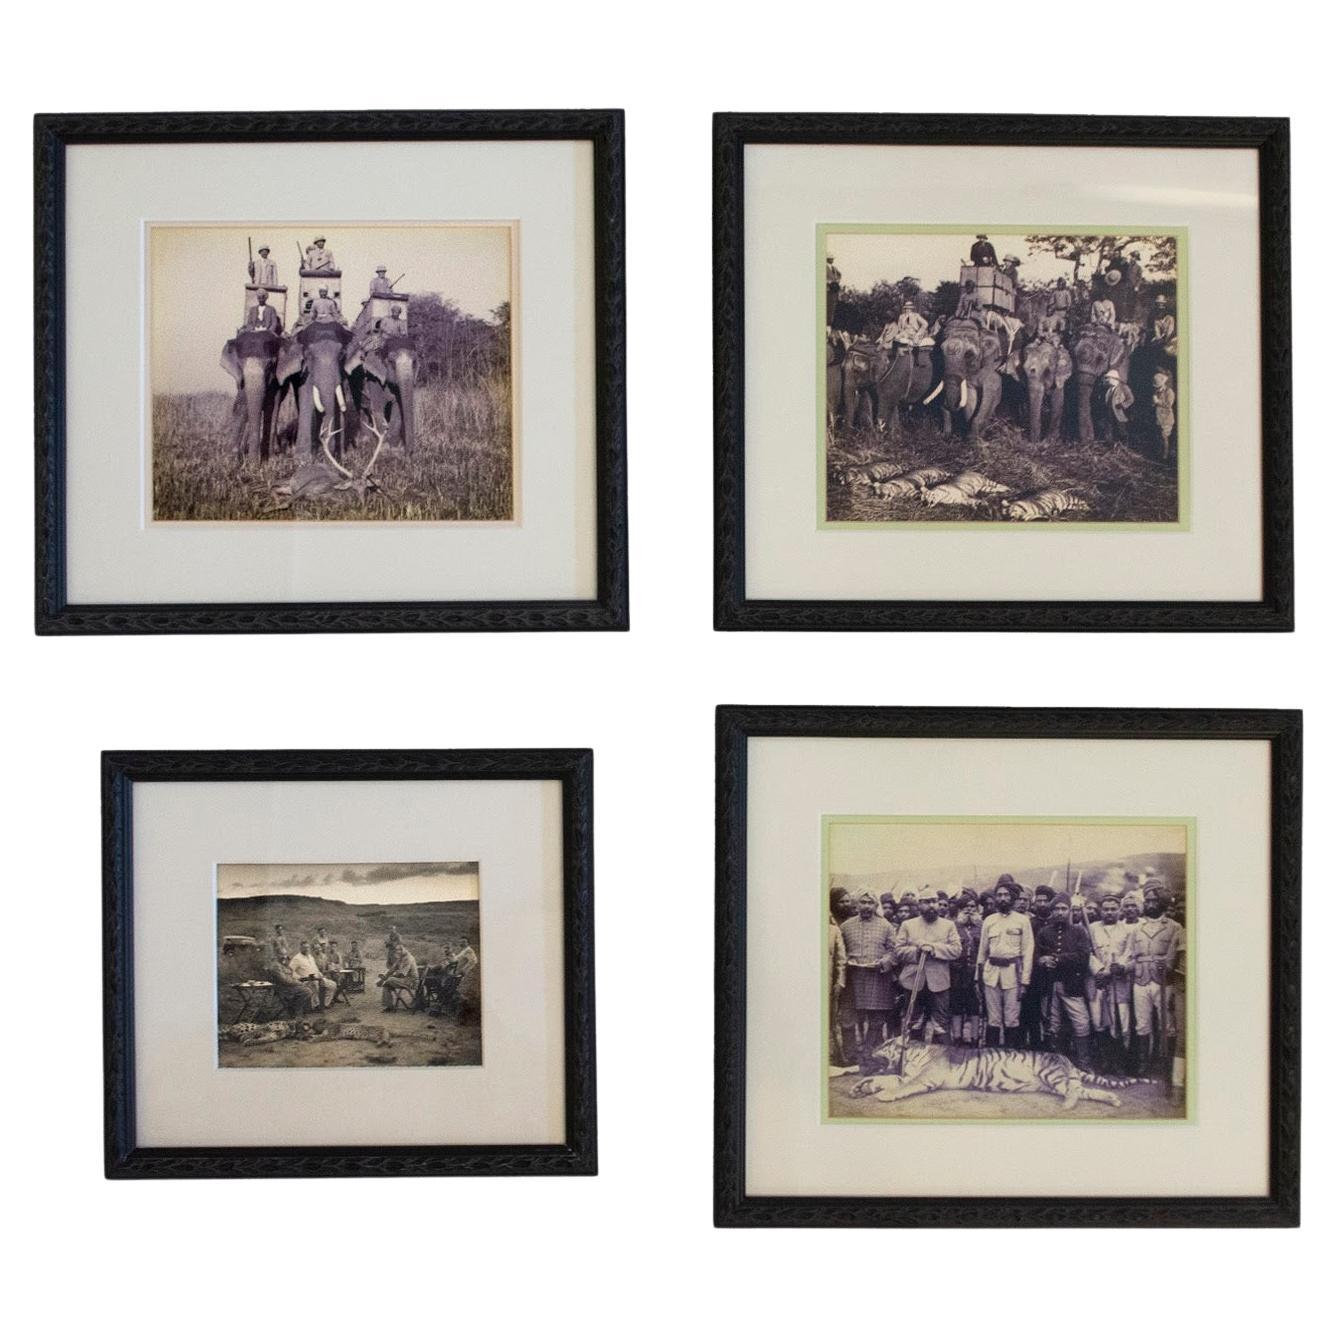 Antique 1930s Photos of a Tiger Hunt in Colonial India For Sale